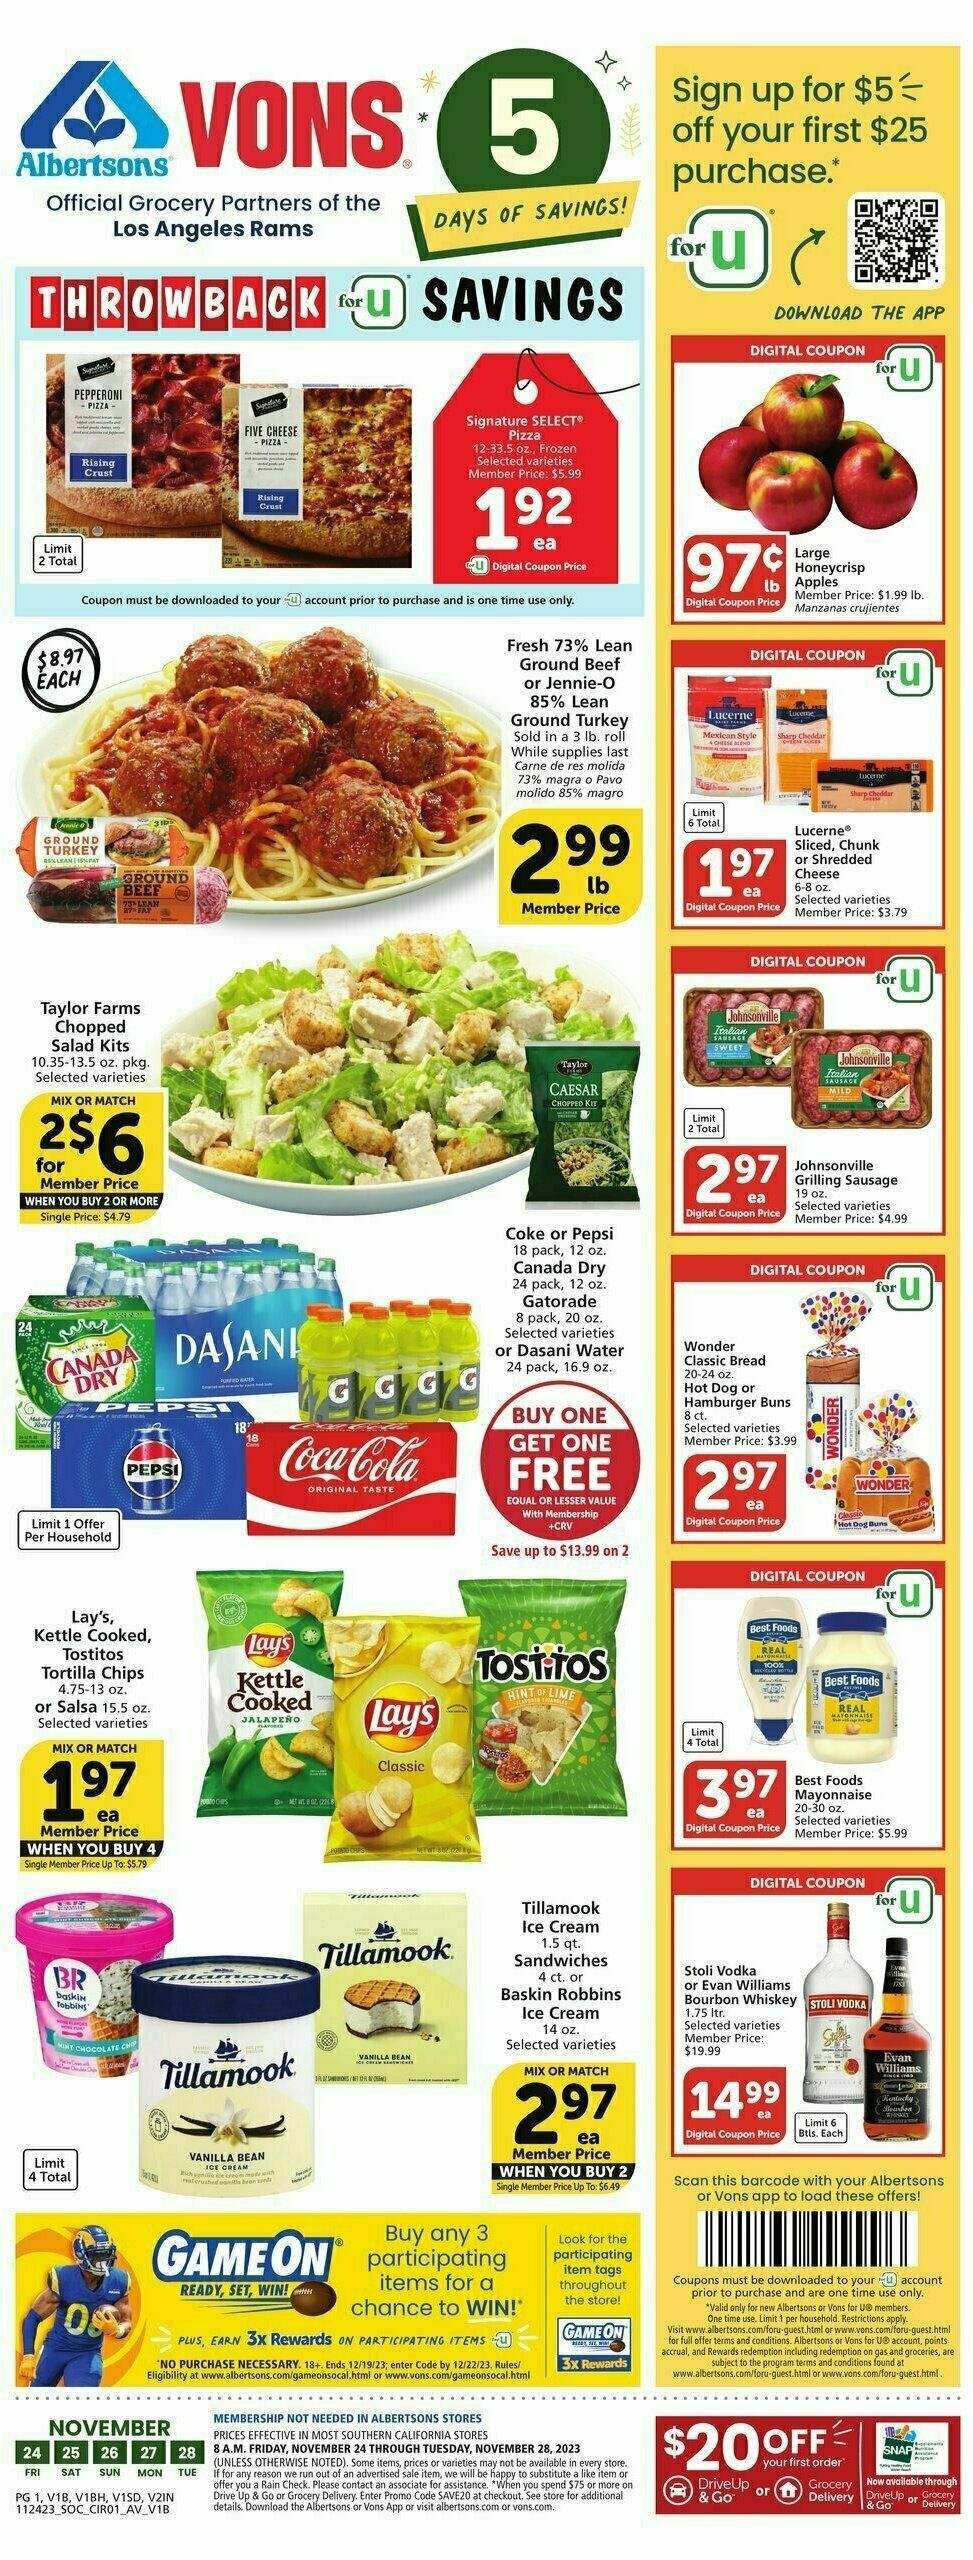 Vons Weekly Ad from November 24